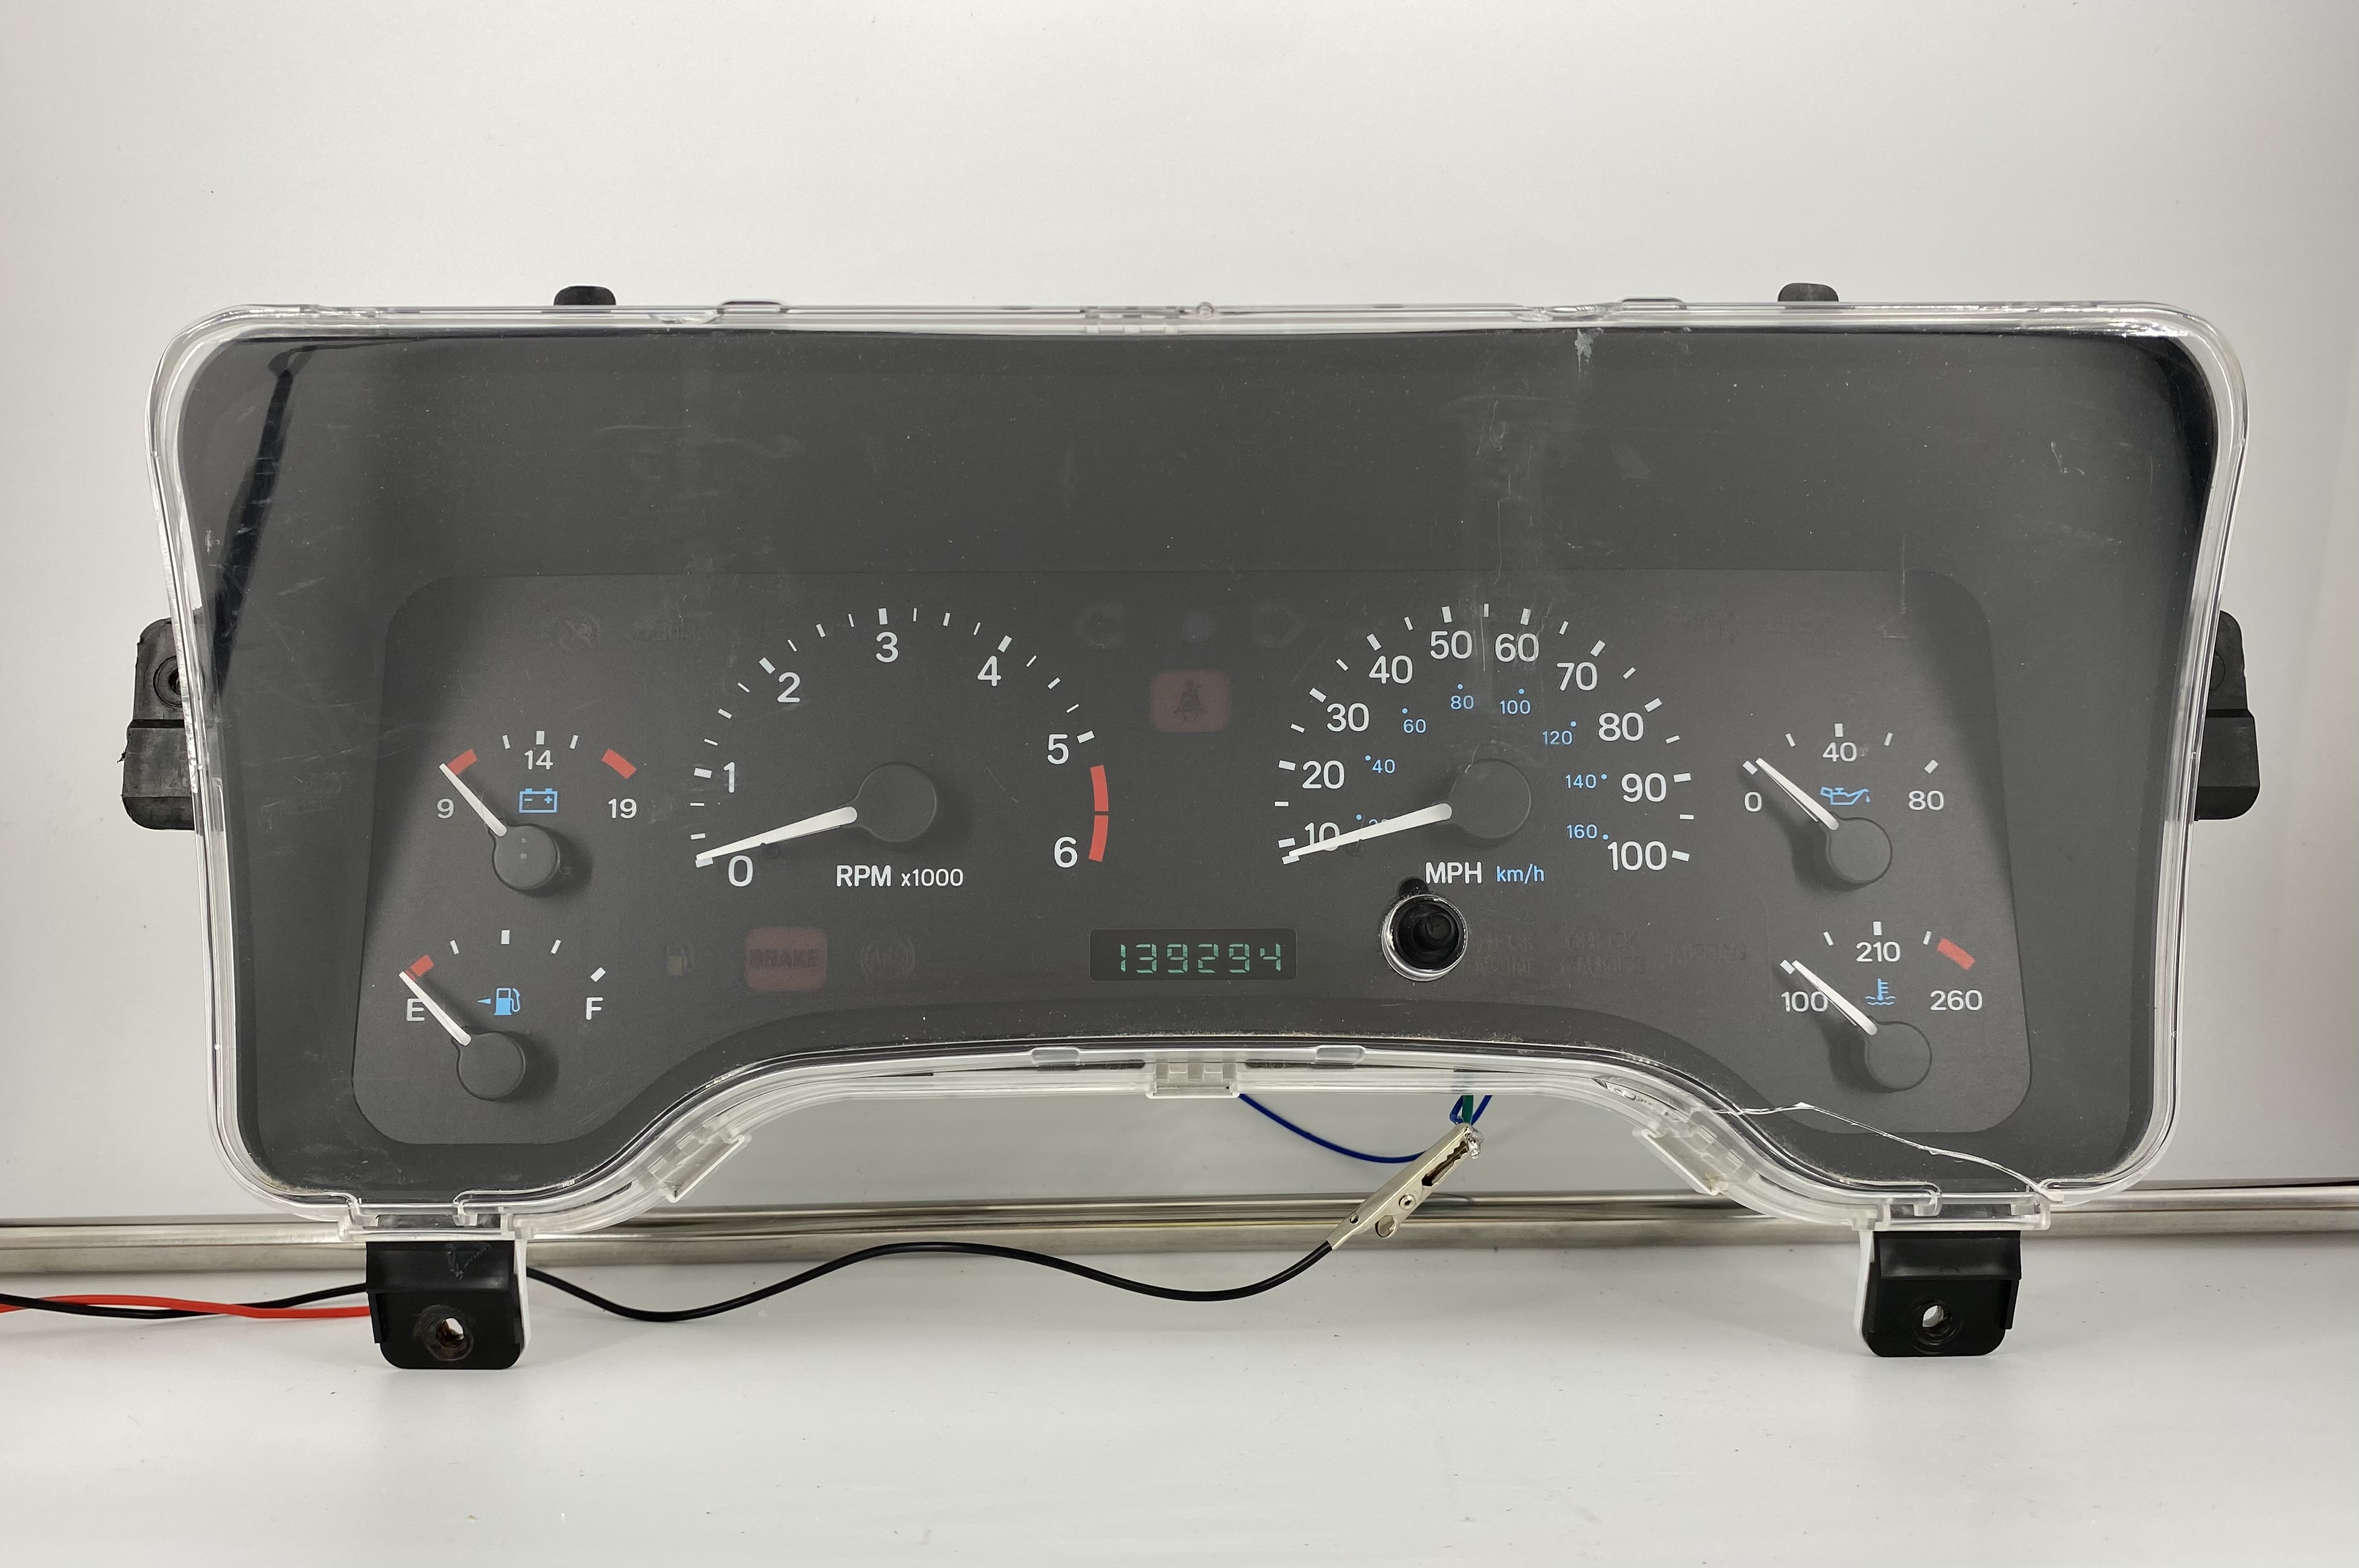 1998 JEEP WRANGLER USED DASHBOARD INSTRUMENT CLUSTER FOR SALE (MPH) -  DASHBOARD INSTRUMENT CLUSTER